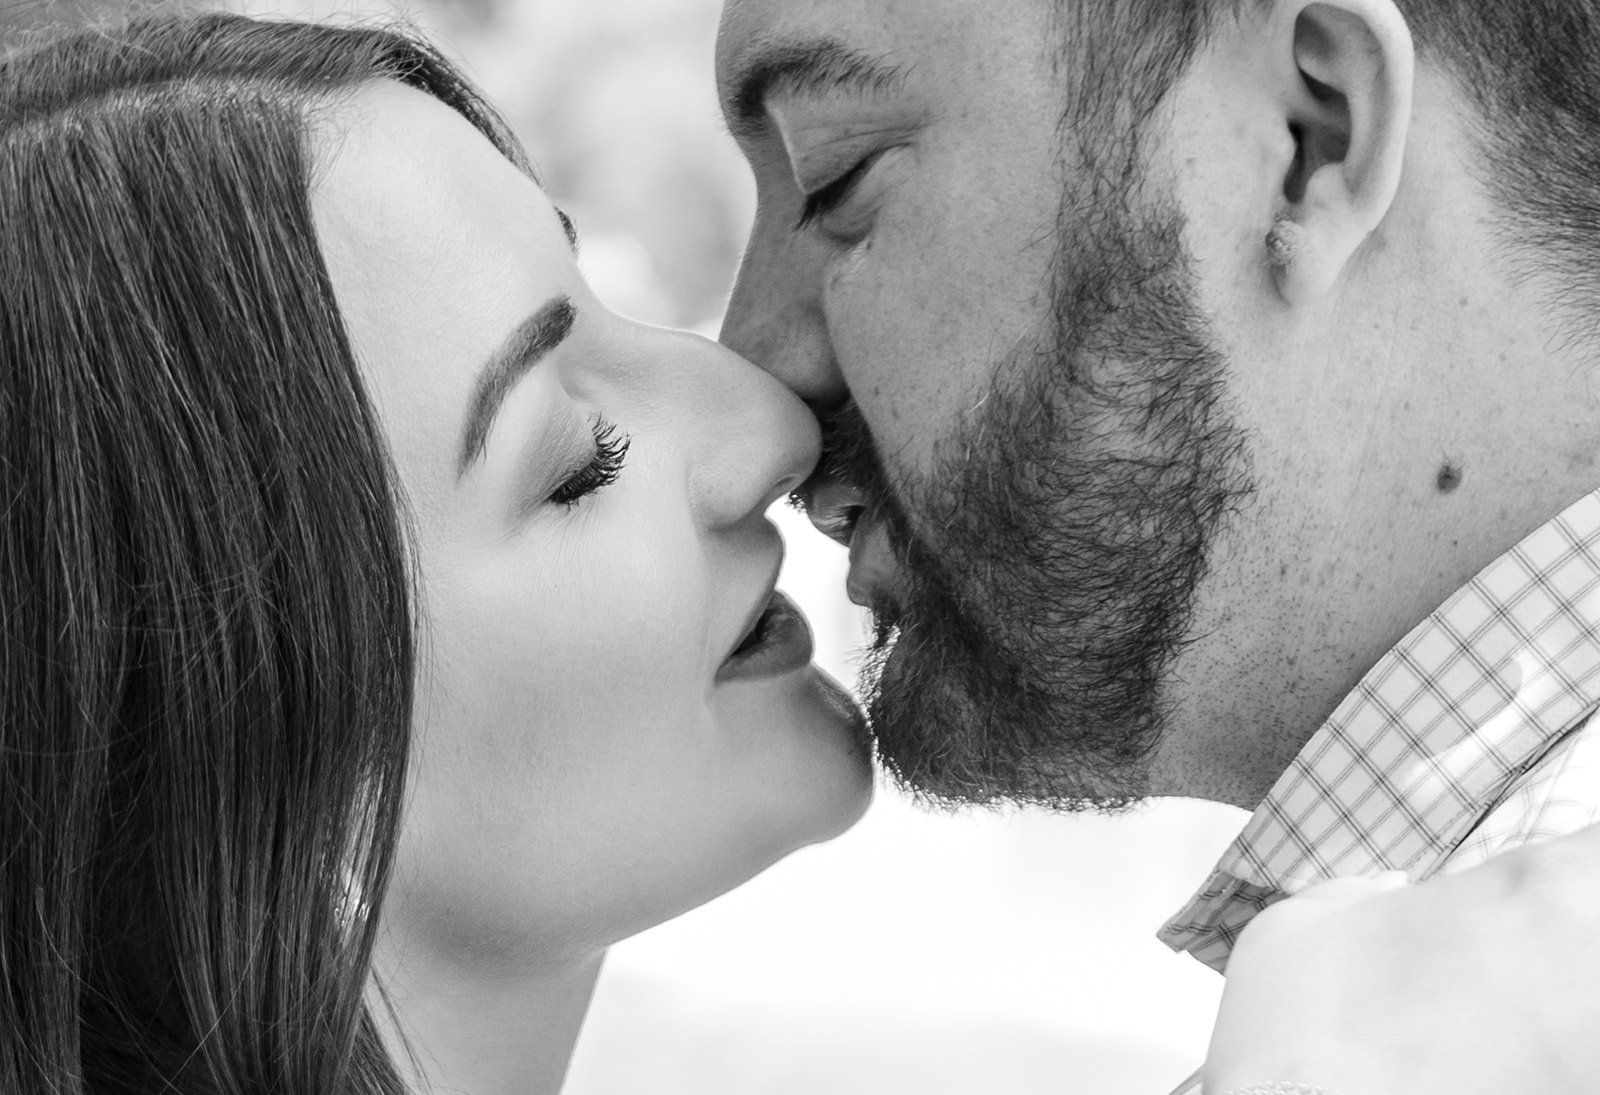 An engaged couple leans in for a kiss in this close up black and white portrait.